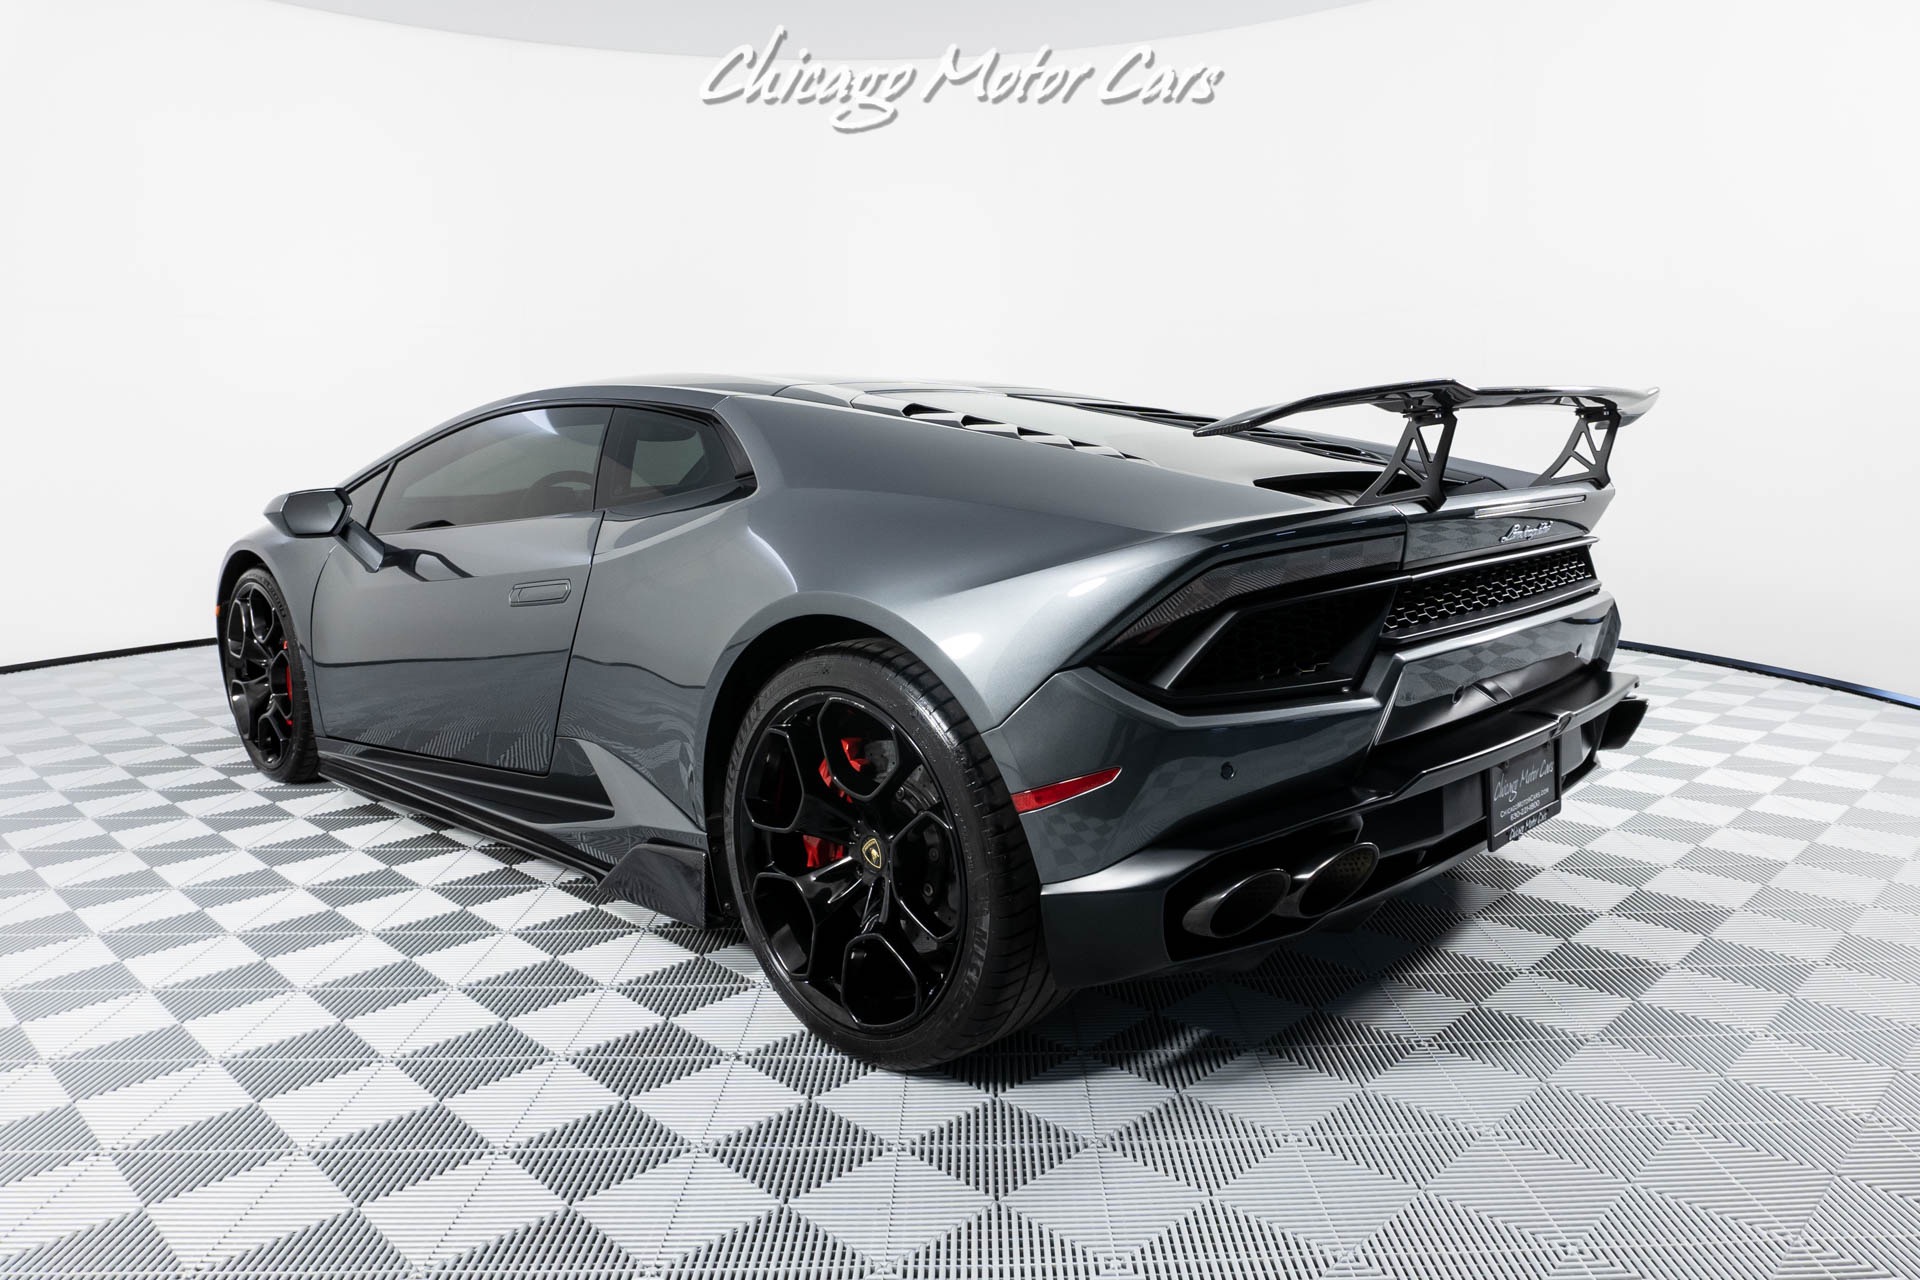 Used-2016-Lamborghini-Huracan-LP580-2-COUPE-CARBON-FIBER-WING-LOW-MILES-FRONT-VEHICLE-LIFT-LOADED